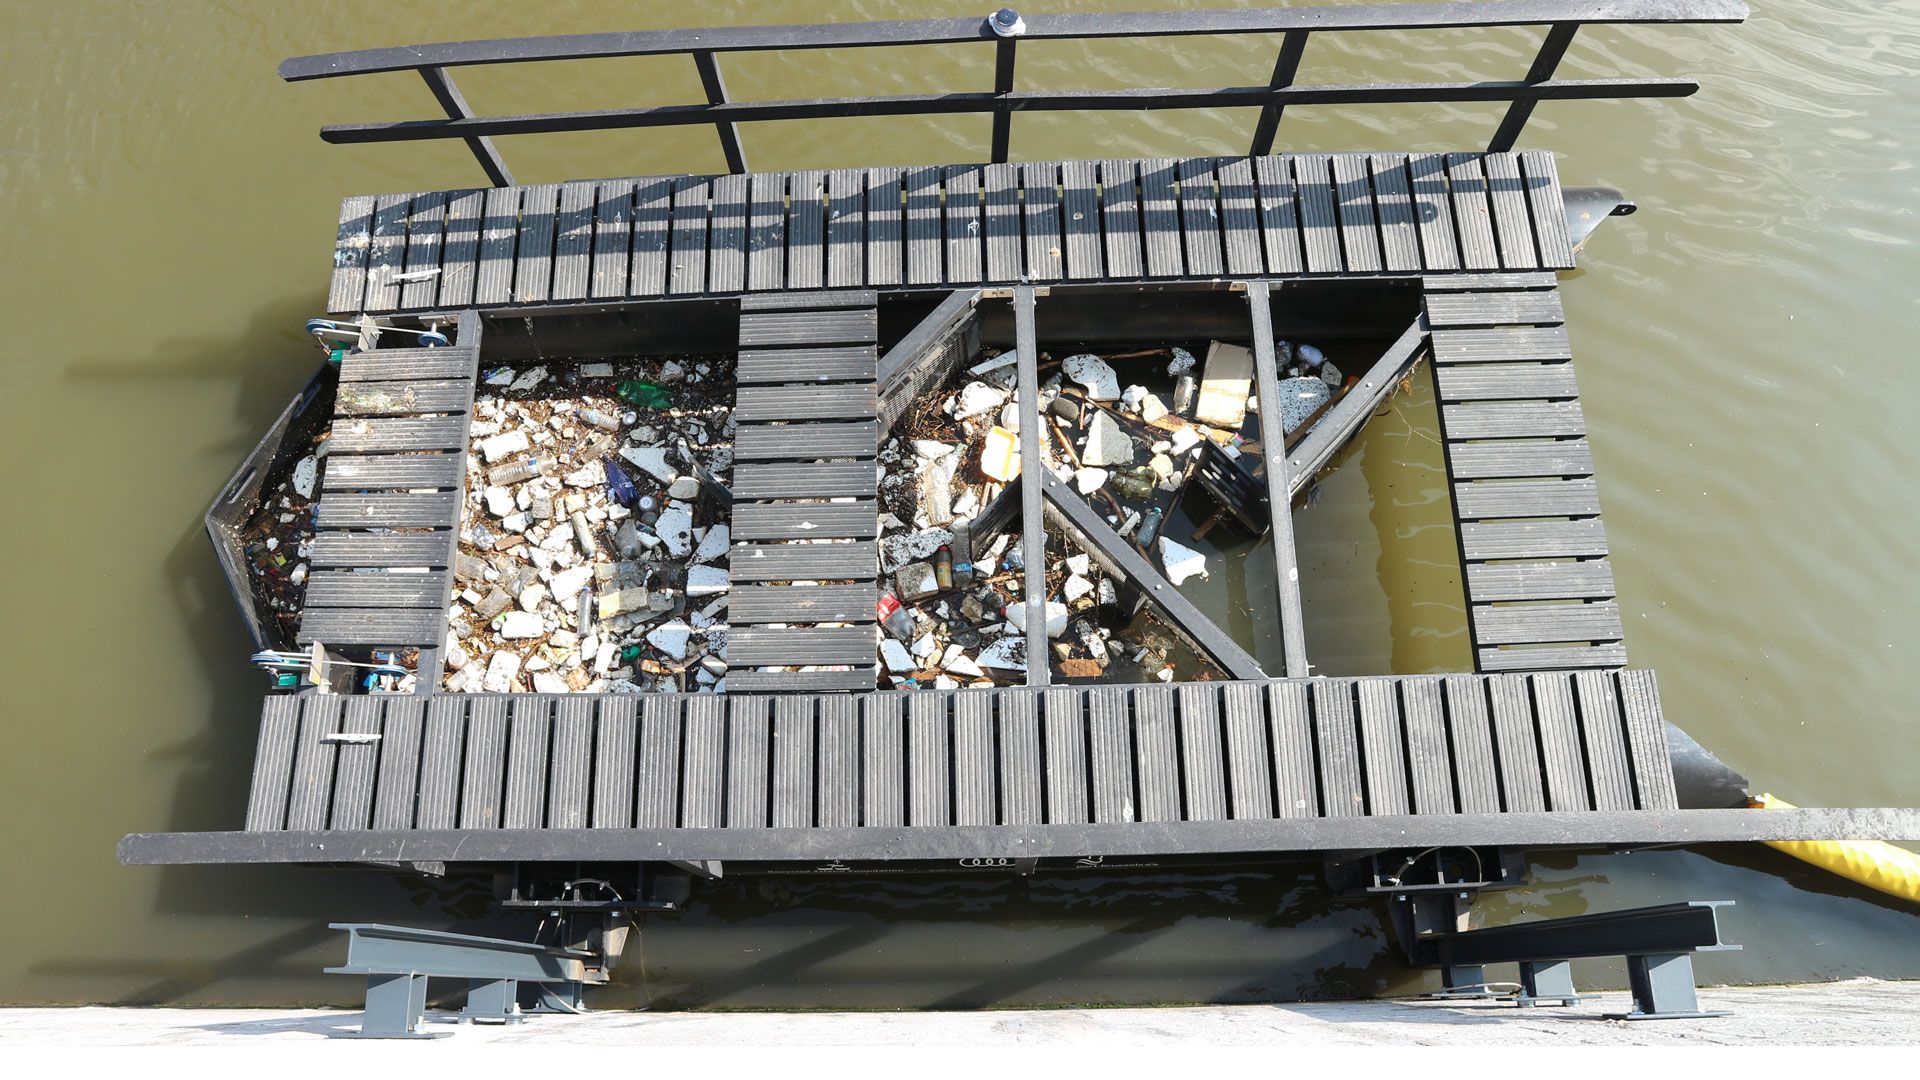 In March 2019 a Litter Trap was installed in the Charleroi Channel in Brussels